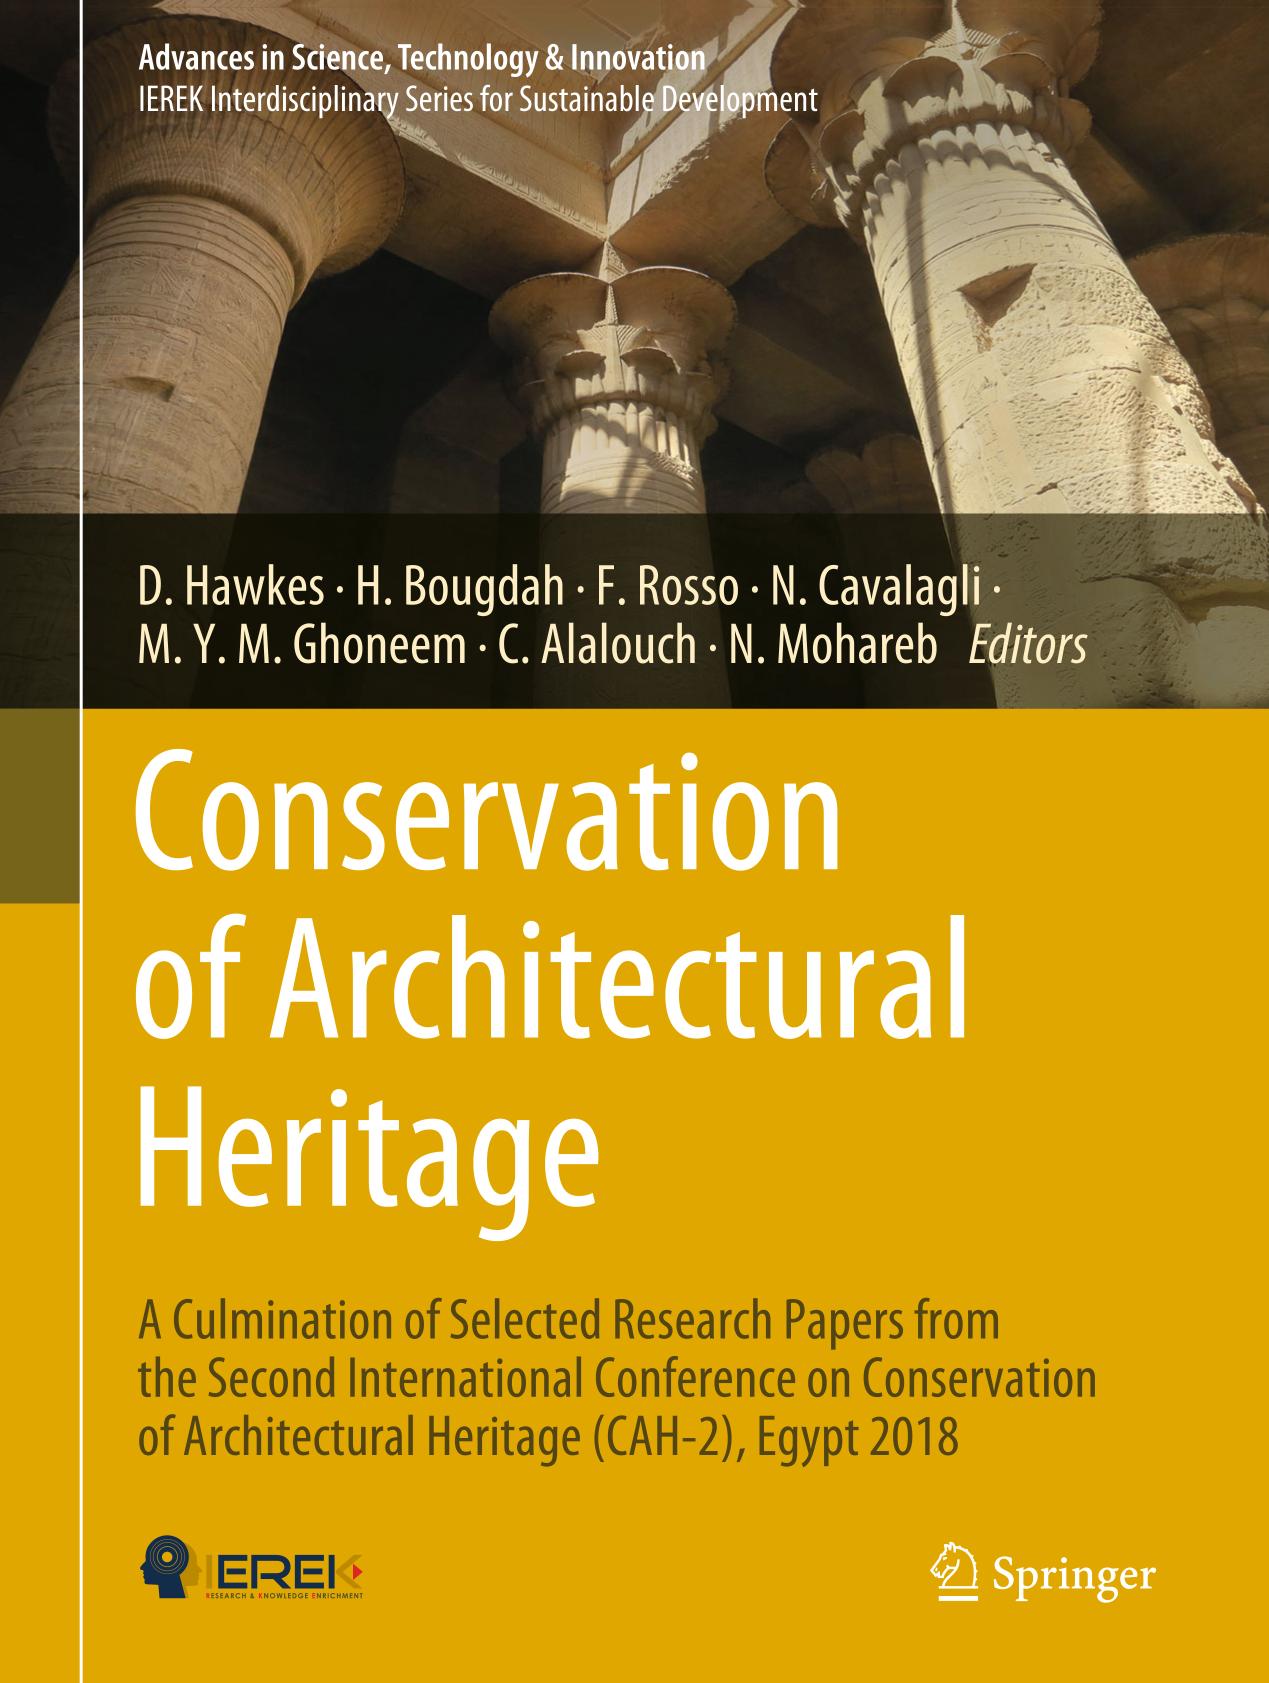 Conservation of architectural heritage : a culmination of selected research papers from the Second International Conference on Conservation of Architectural Heritage (CAH-2), Egypt 2018